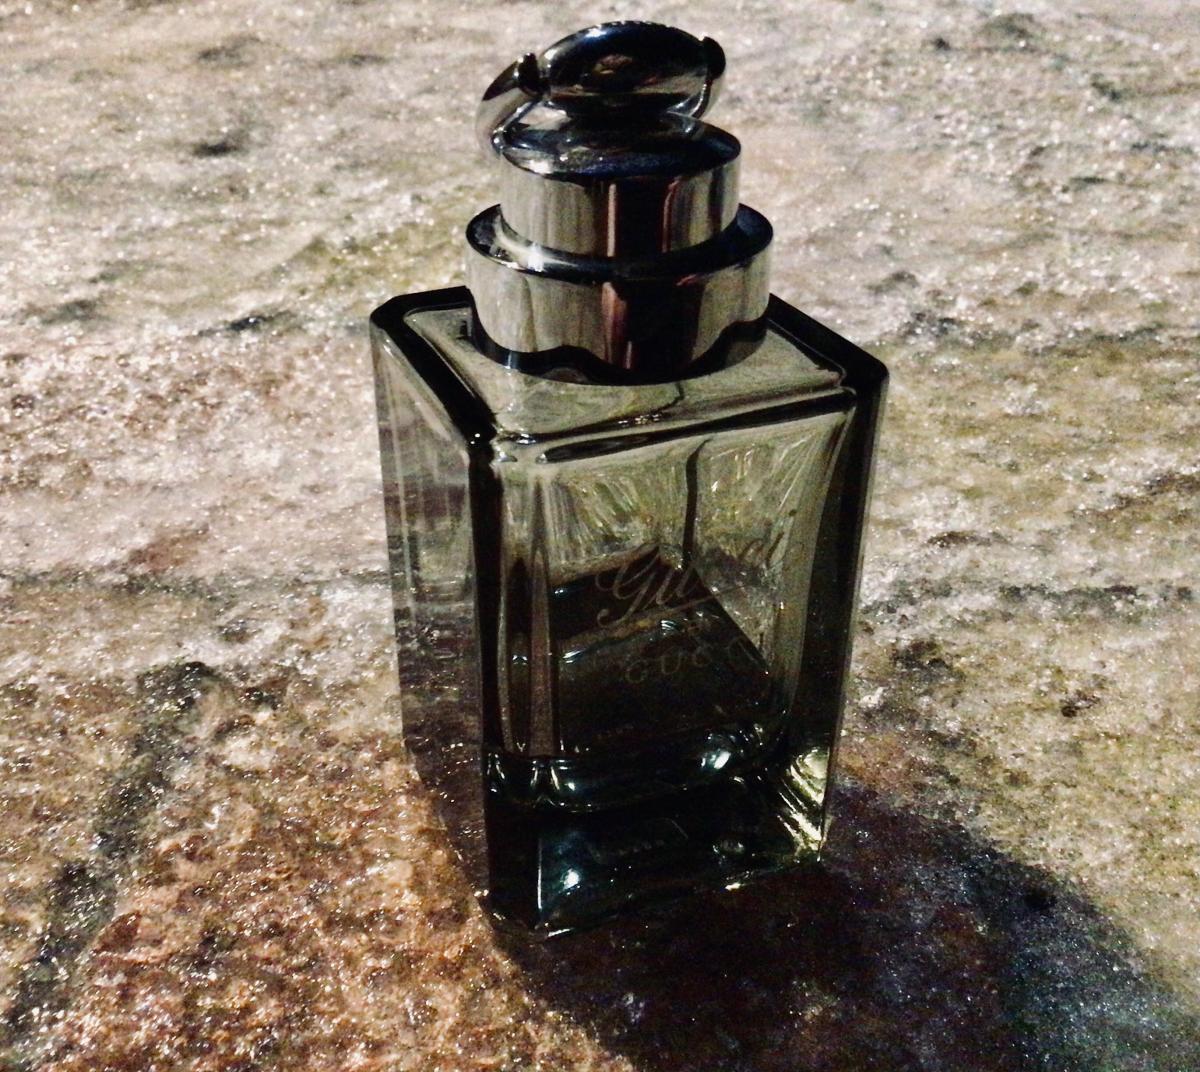 Gucci by Gucci Pour Homme Gucci cologne - a fragrance for men 2008